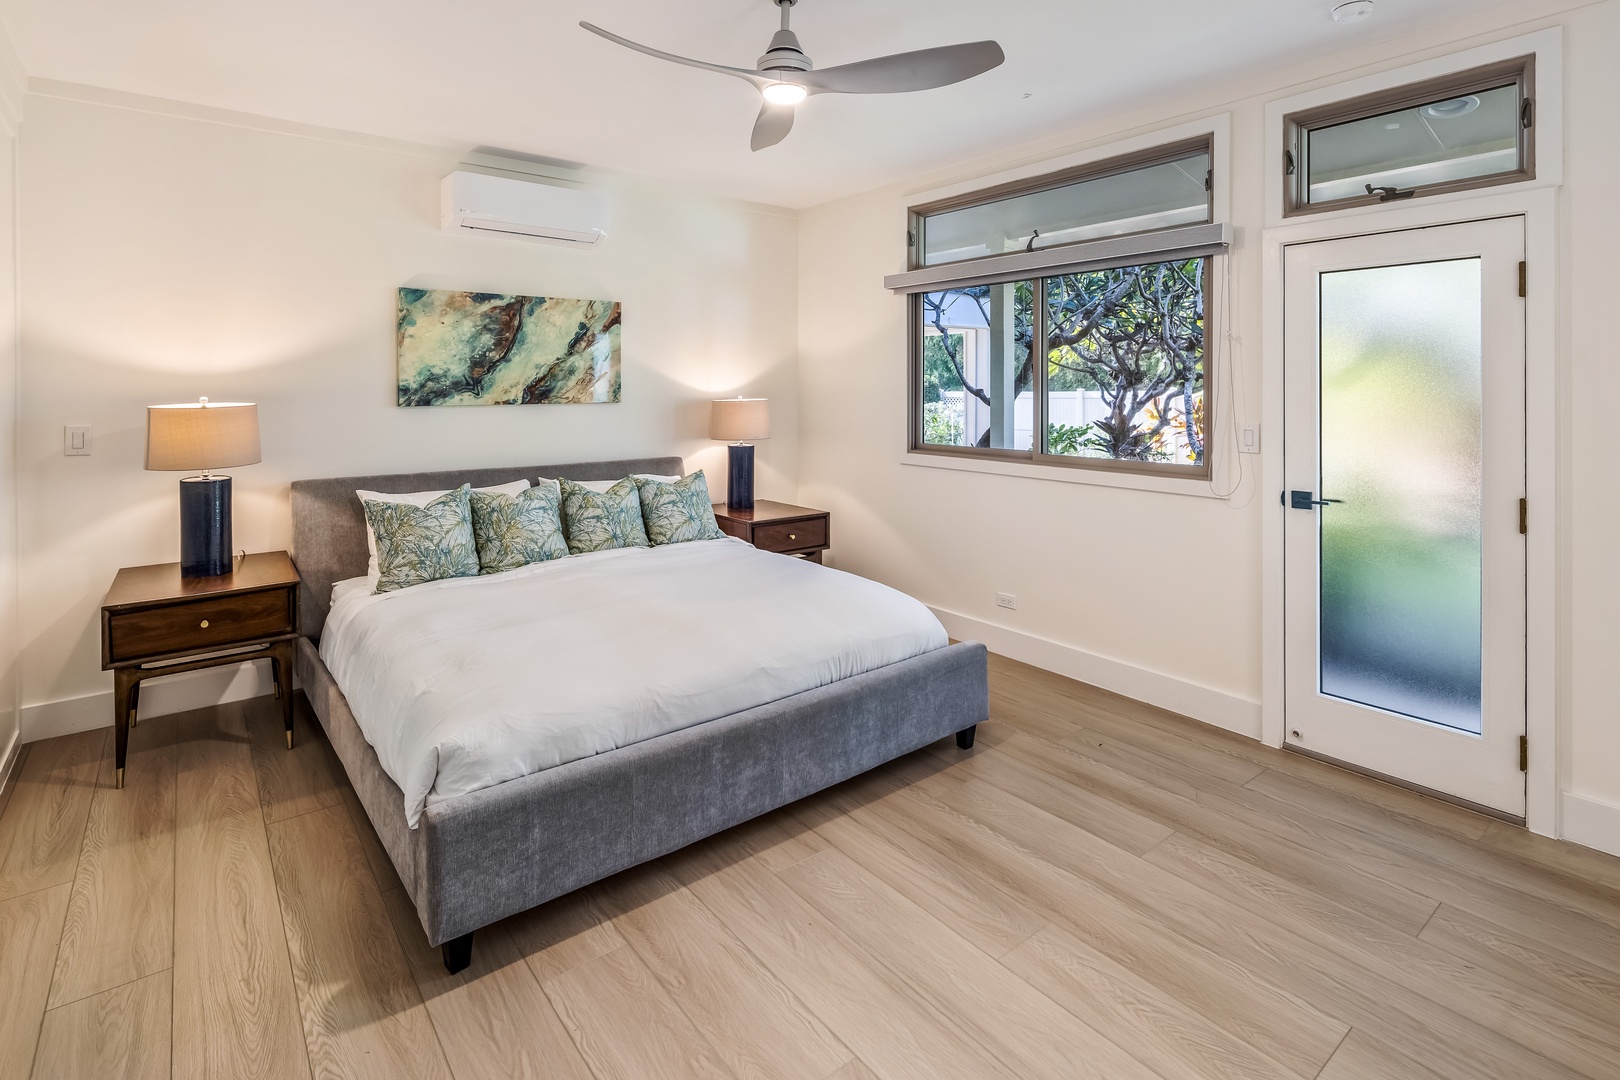 Kailua Vacation Rentals, Na Makana Villa - Guest Bedroom 4 with king bed, garden view, split AC, and ceiling fan